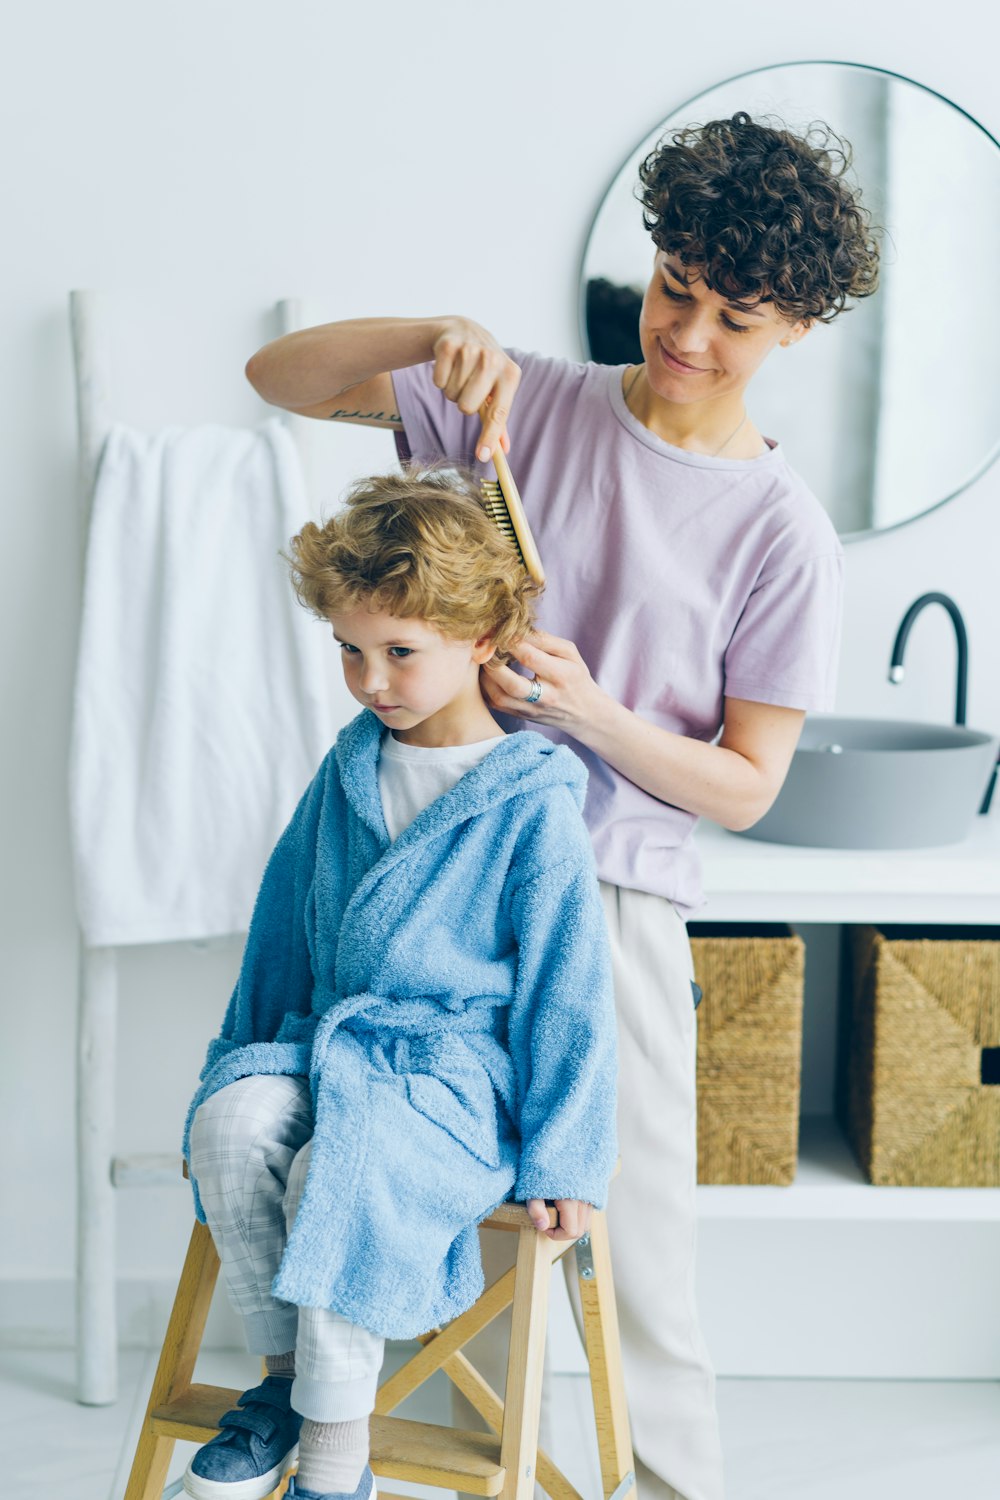 a woman combing a young boy's hair in a bathroom